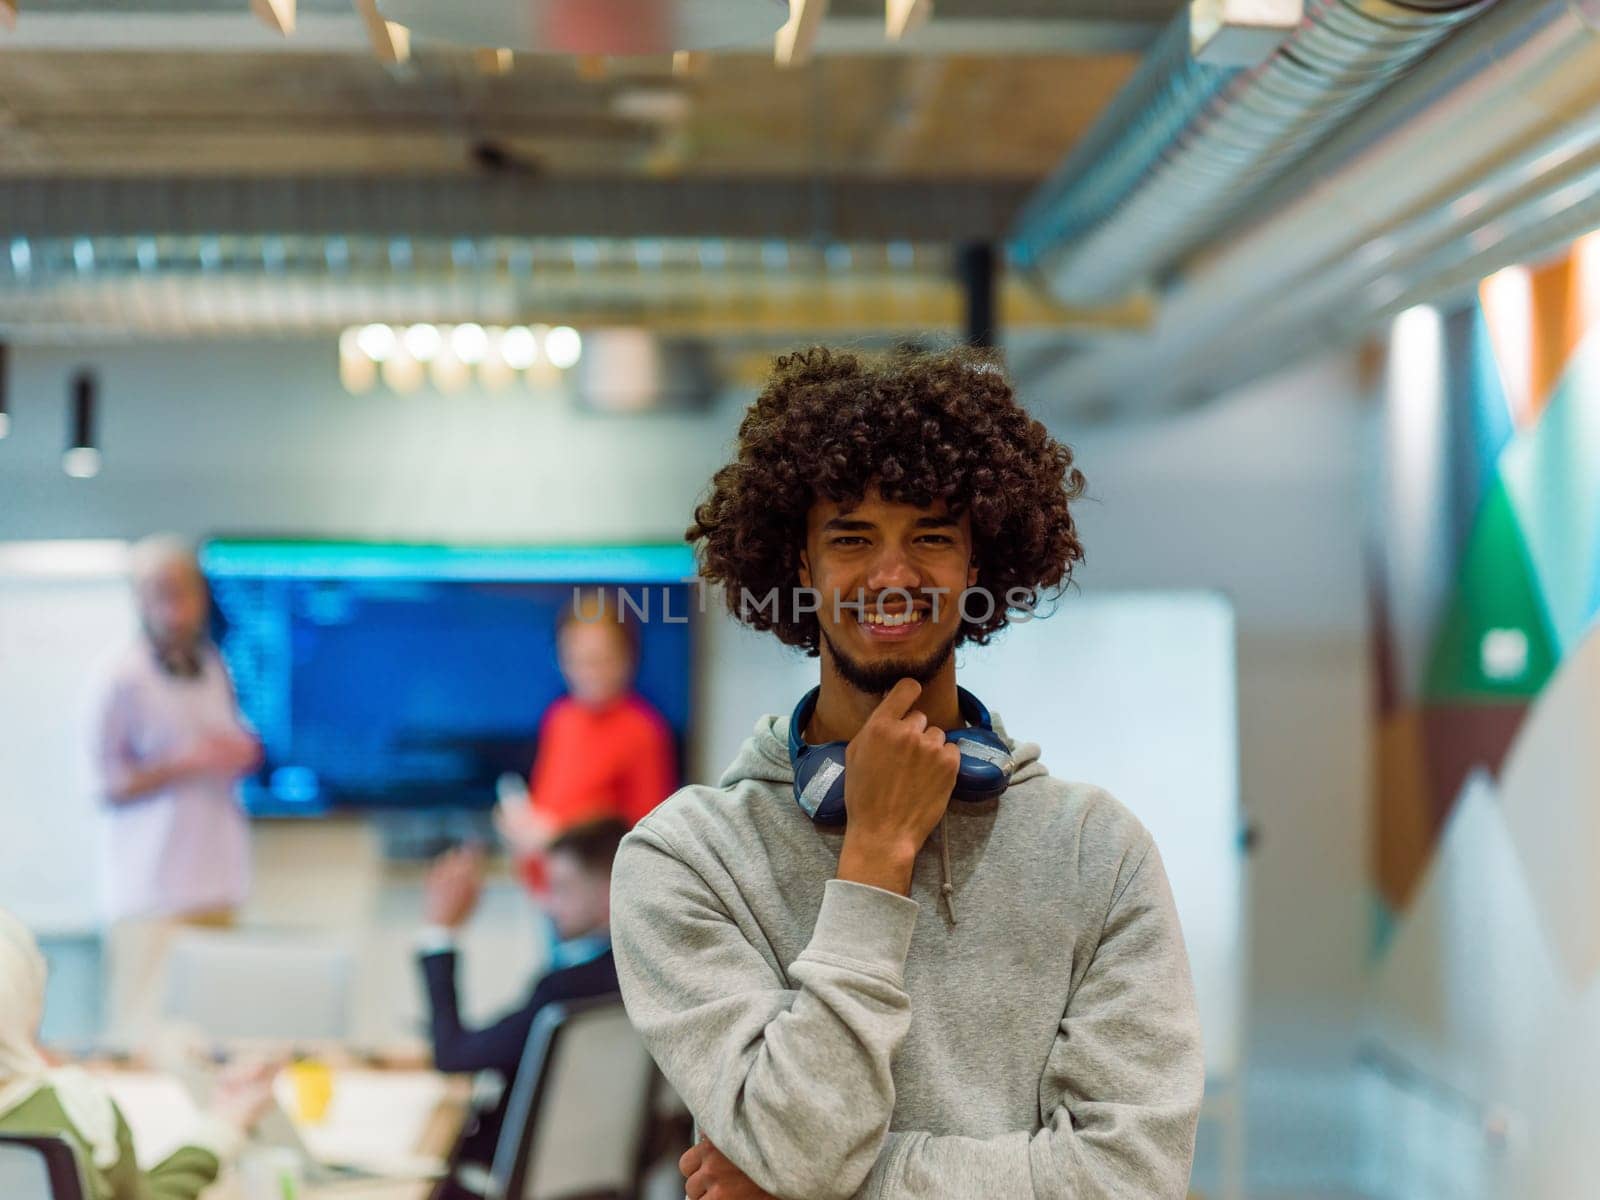 In a modern office environment, an African American young entrepreneur with headphones engages in work, while in the background, his dedicated colleagues exemplify teamwork and collaboration, encapsulating the essence of contemporary corporate success.